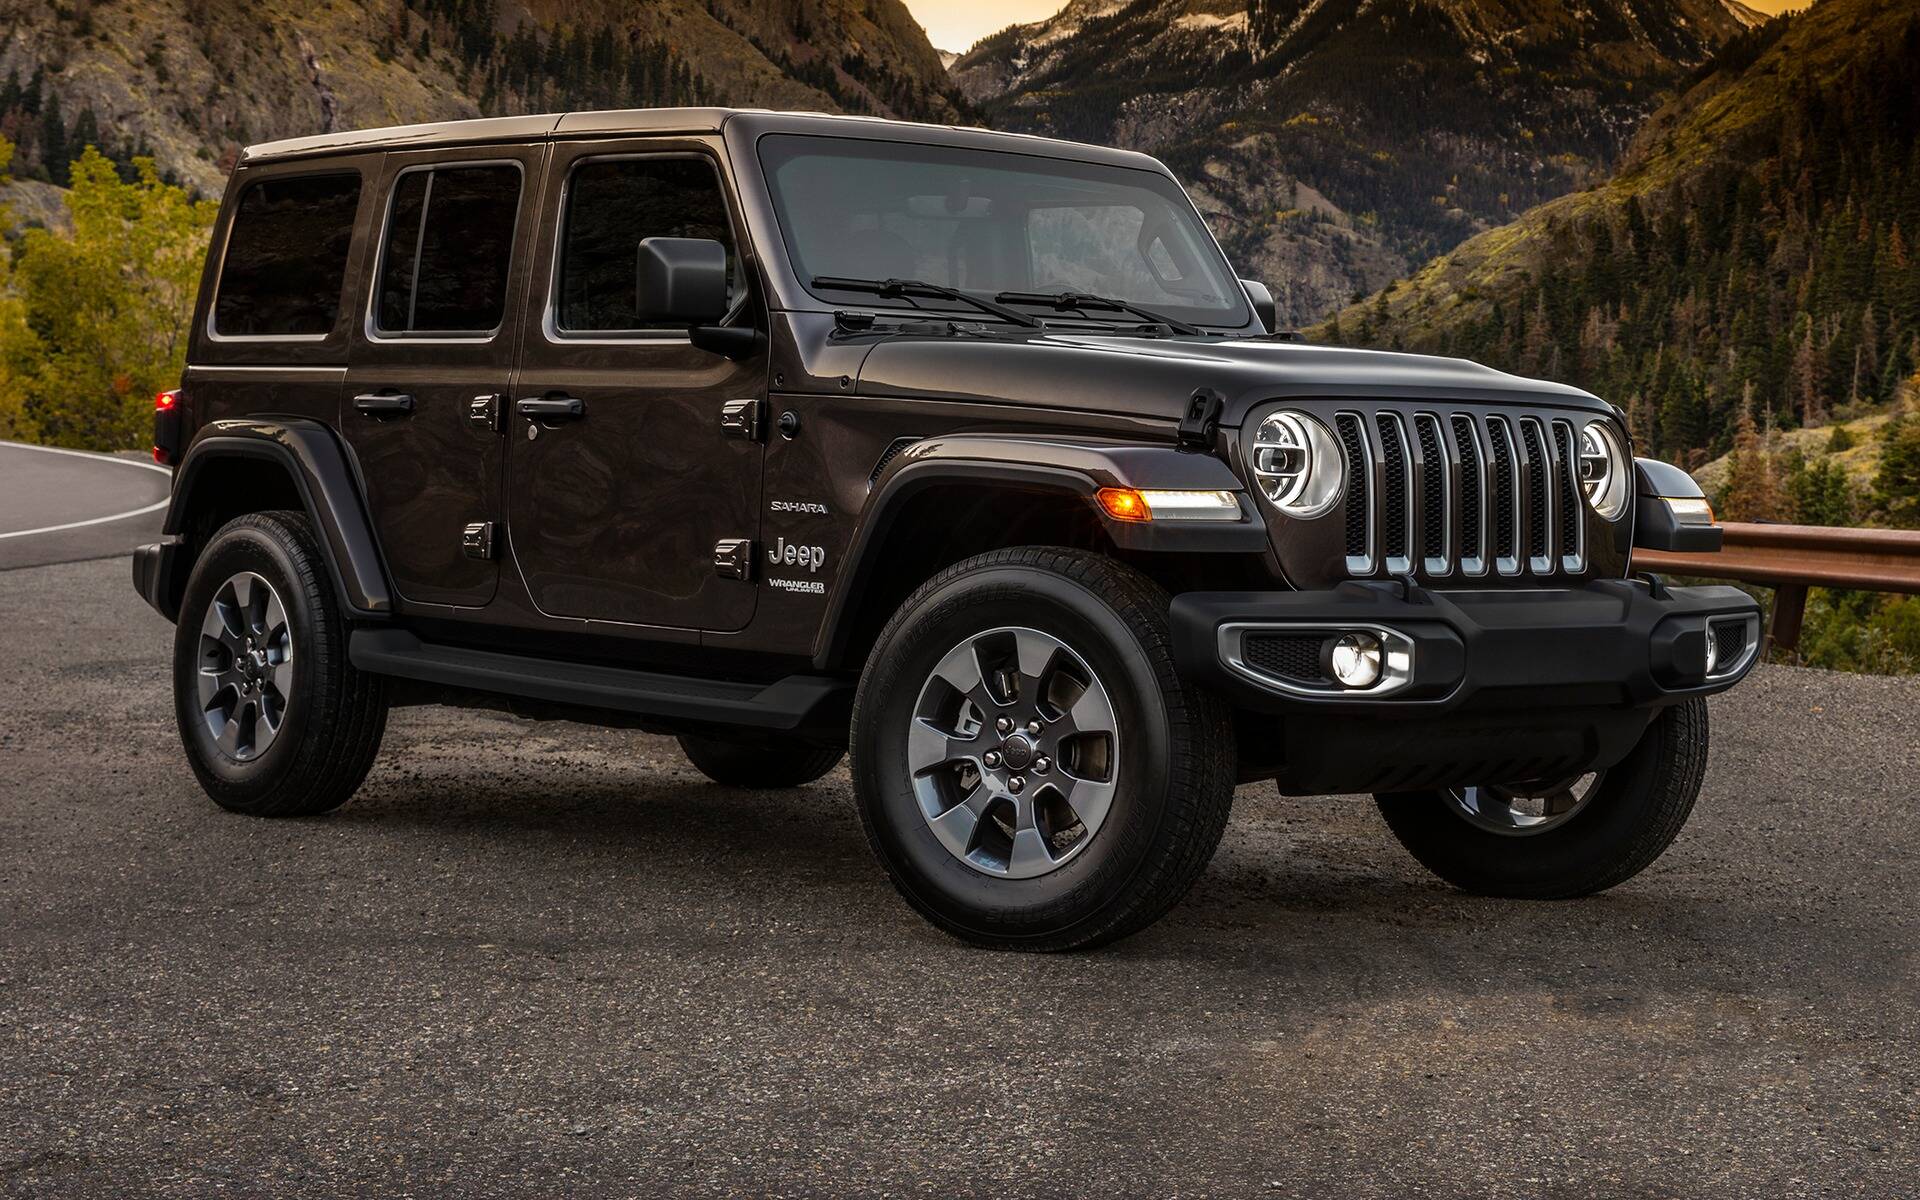 Pre-Owned Jeep Wrangler: What Trim Should You Get?